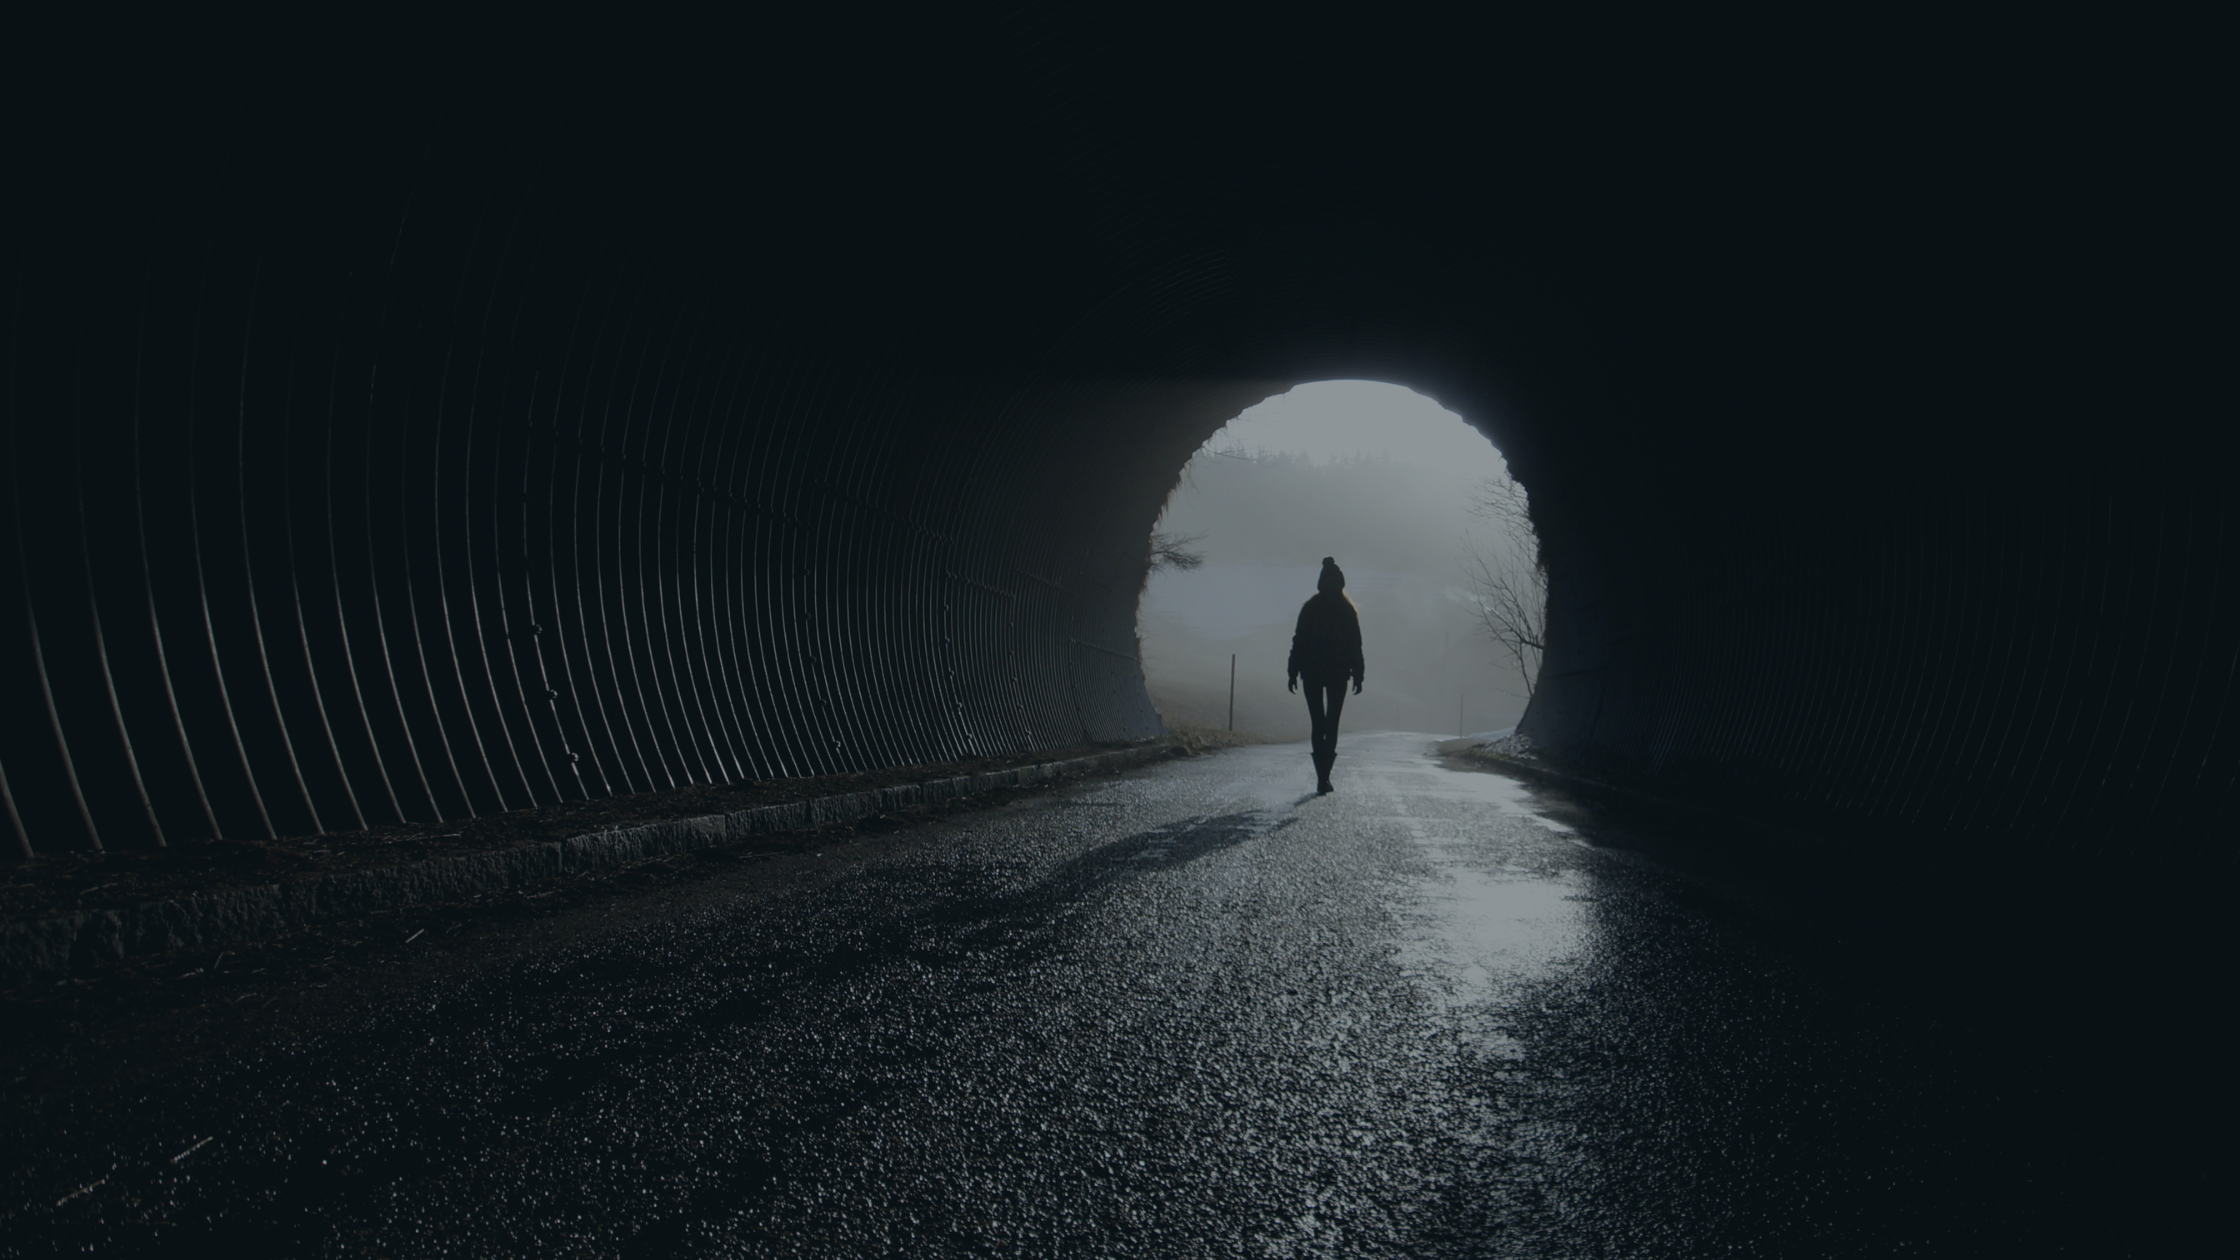 Light at the end of the tunnel | #MentalHealthAwarenessWeek.